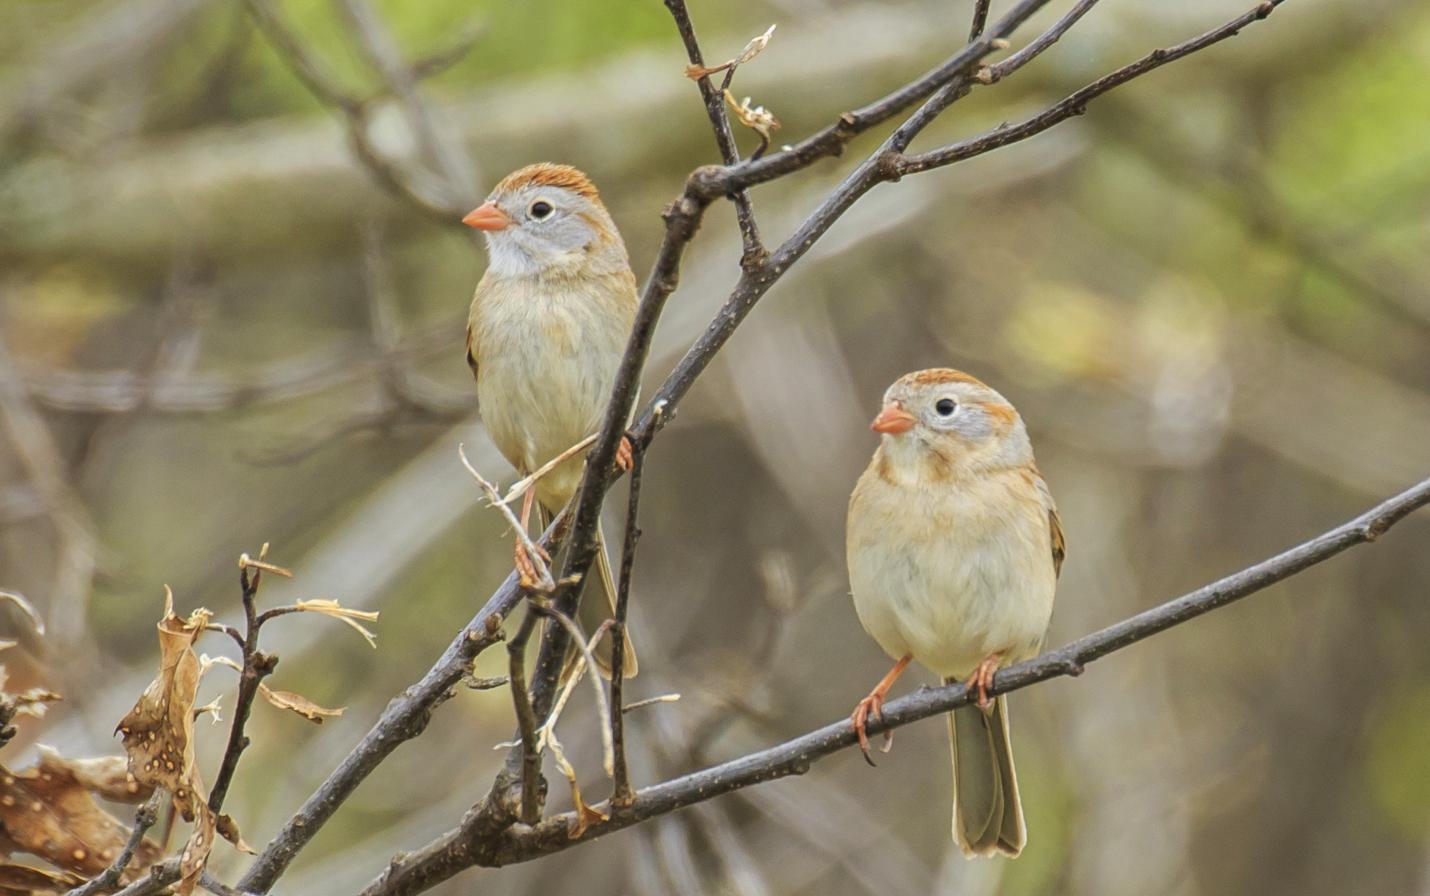 field sparrows at Plum Creek Conservation Area